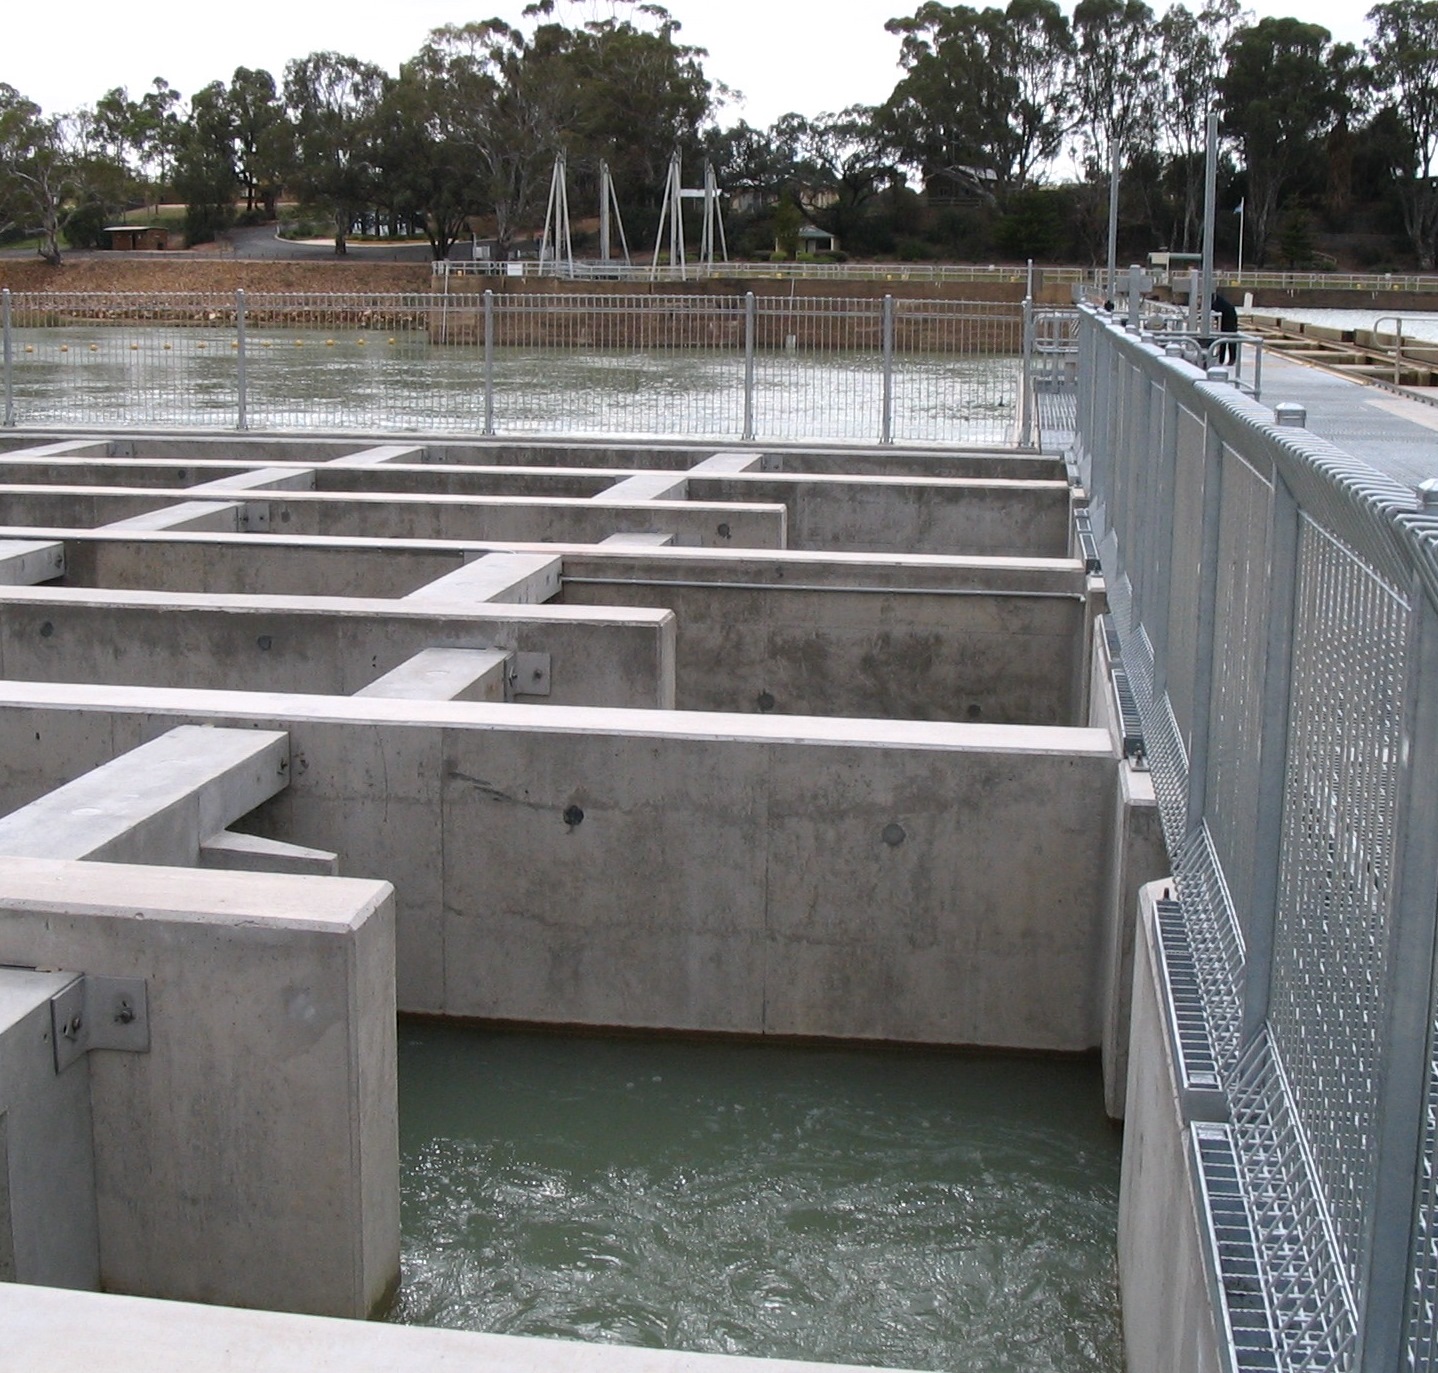 A vertical slot fishway, made up of a series of concrete chambers